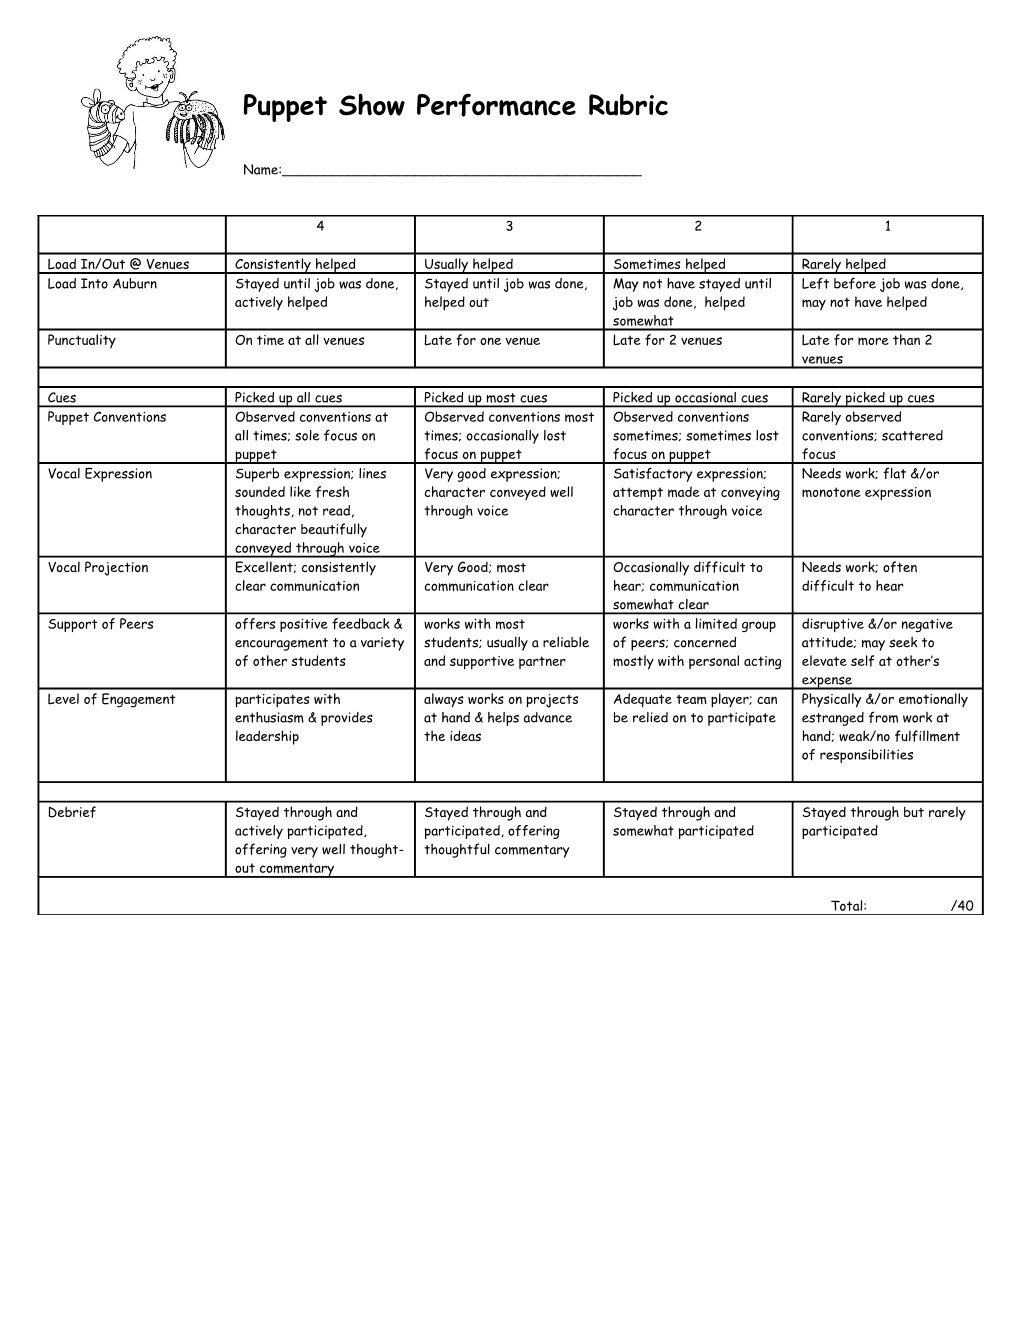 Puppet Show Performance Rubric